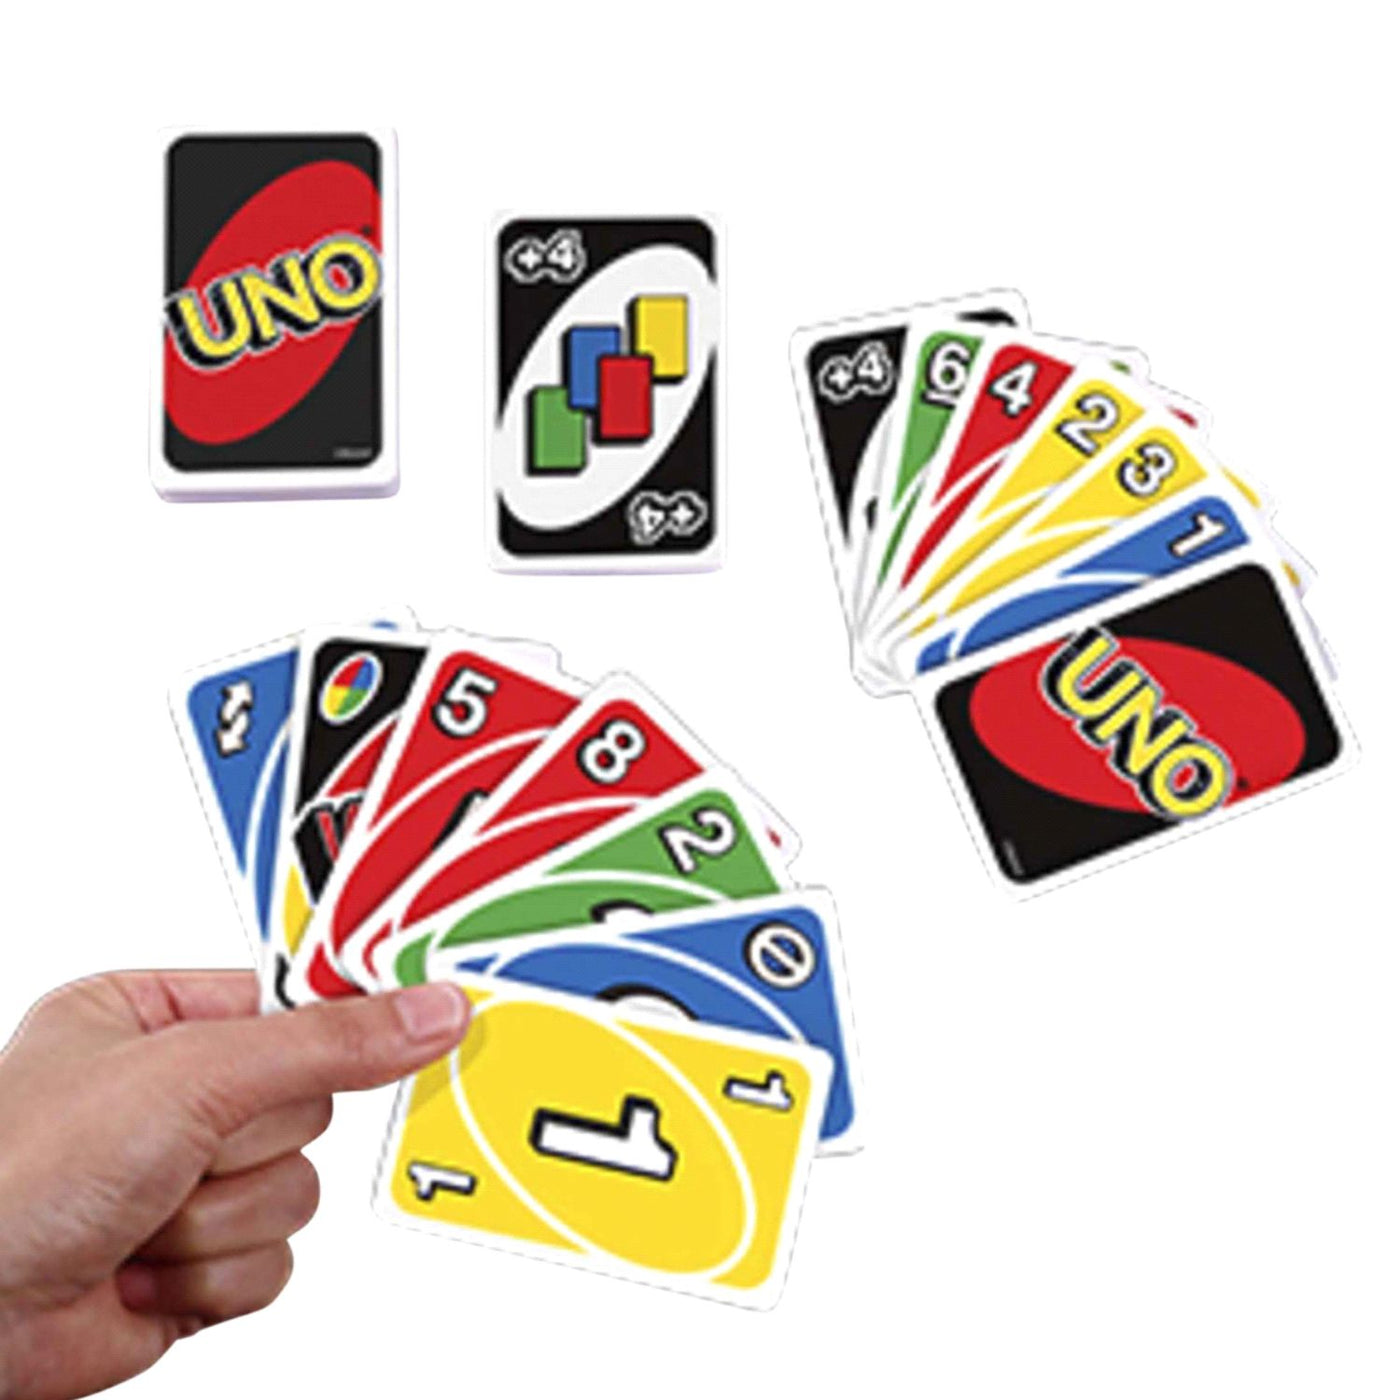 UNO Triple Play Stealth Game Black Edition Family Card Game COMPLETE